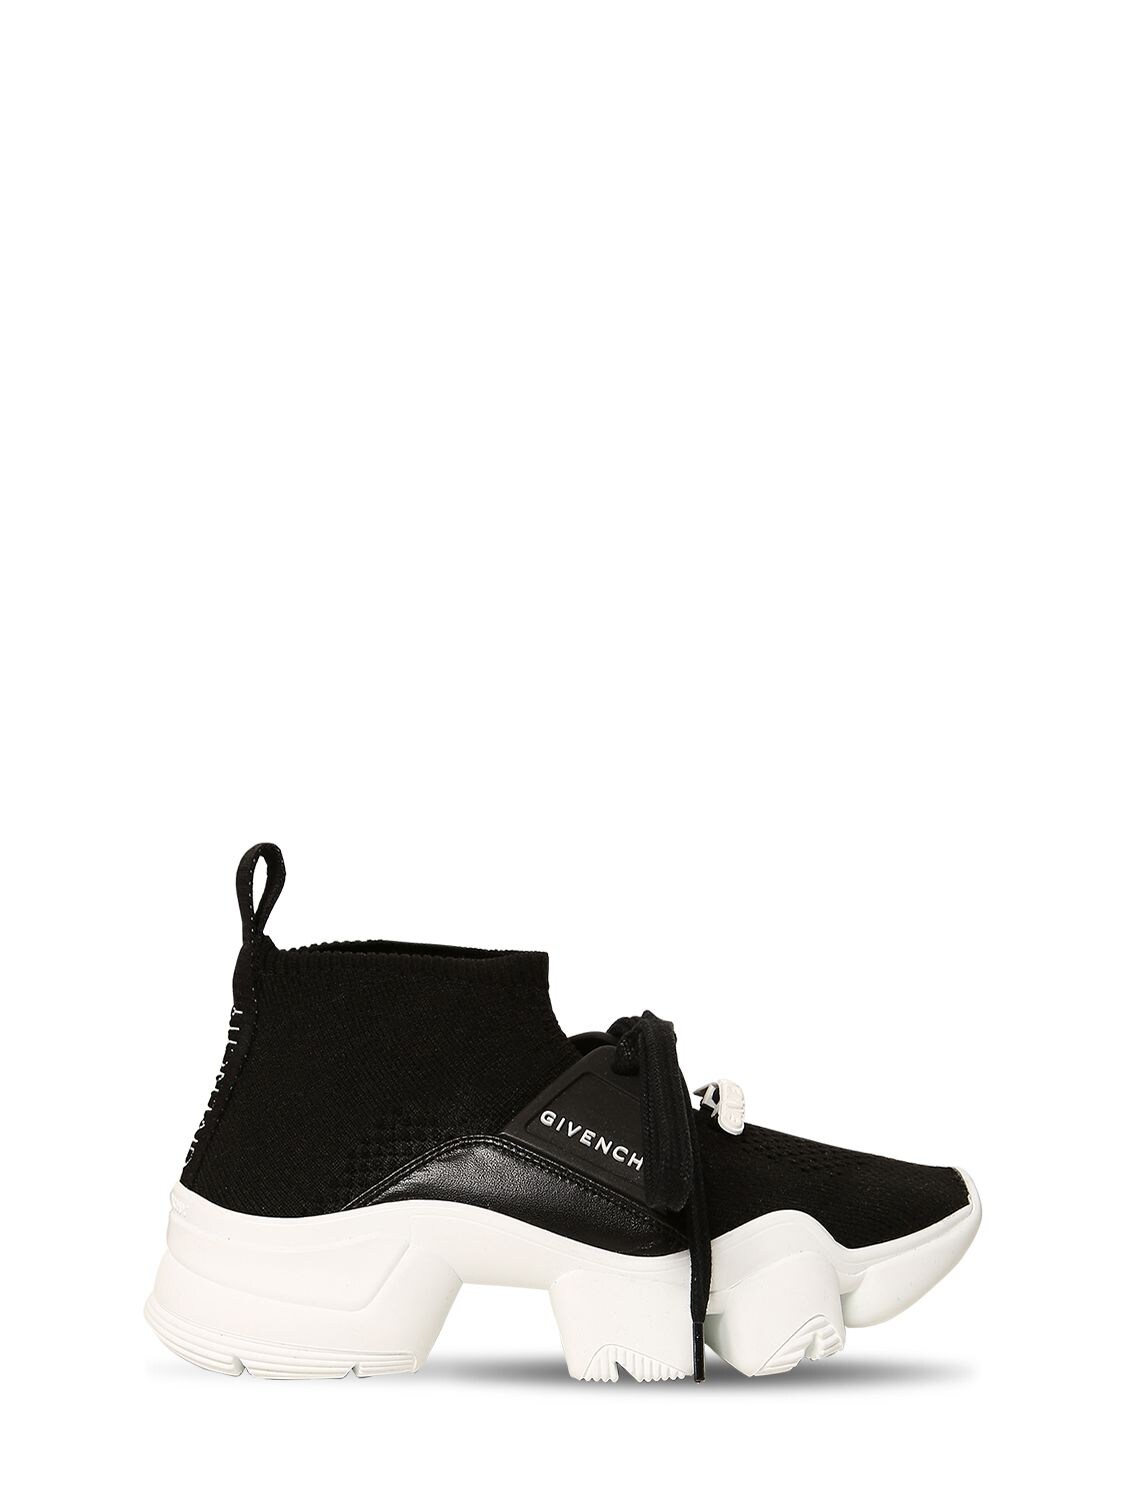 GIVENCHY KNIT SLIP-ON SNEAKERS,71IOFK101-MDLC0